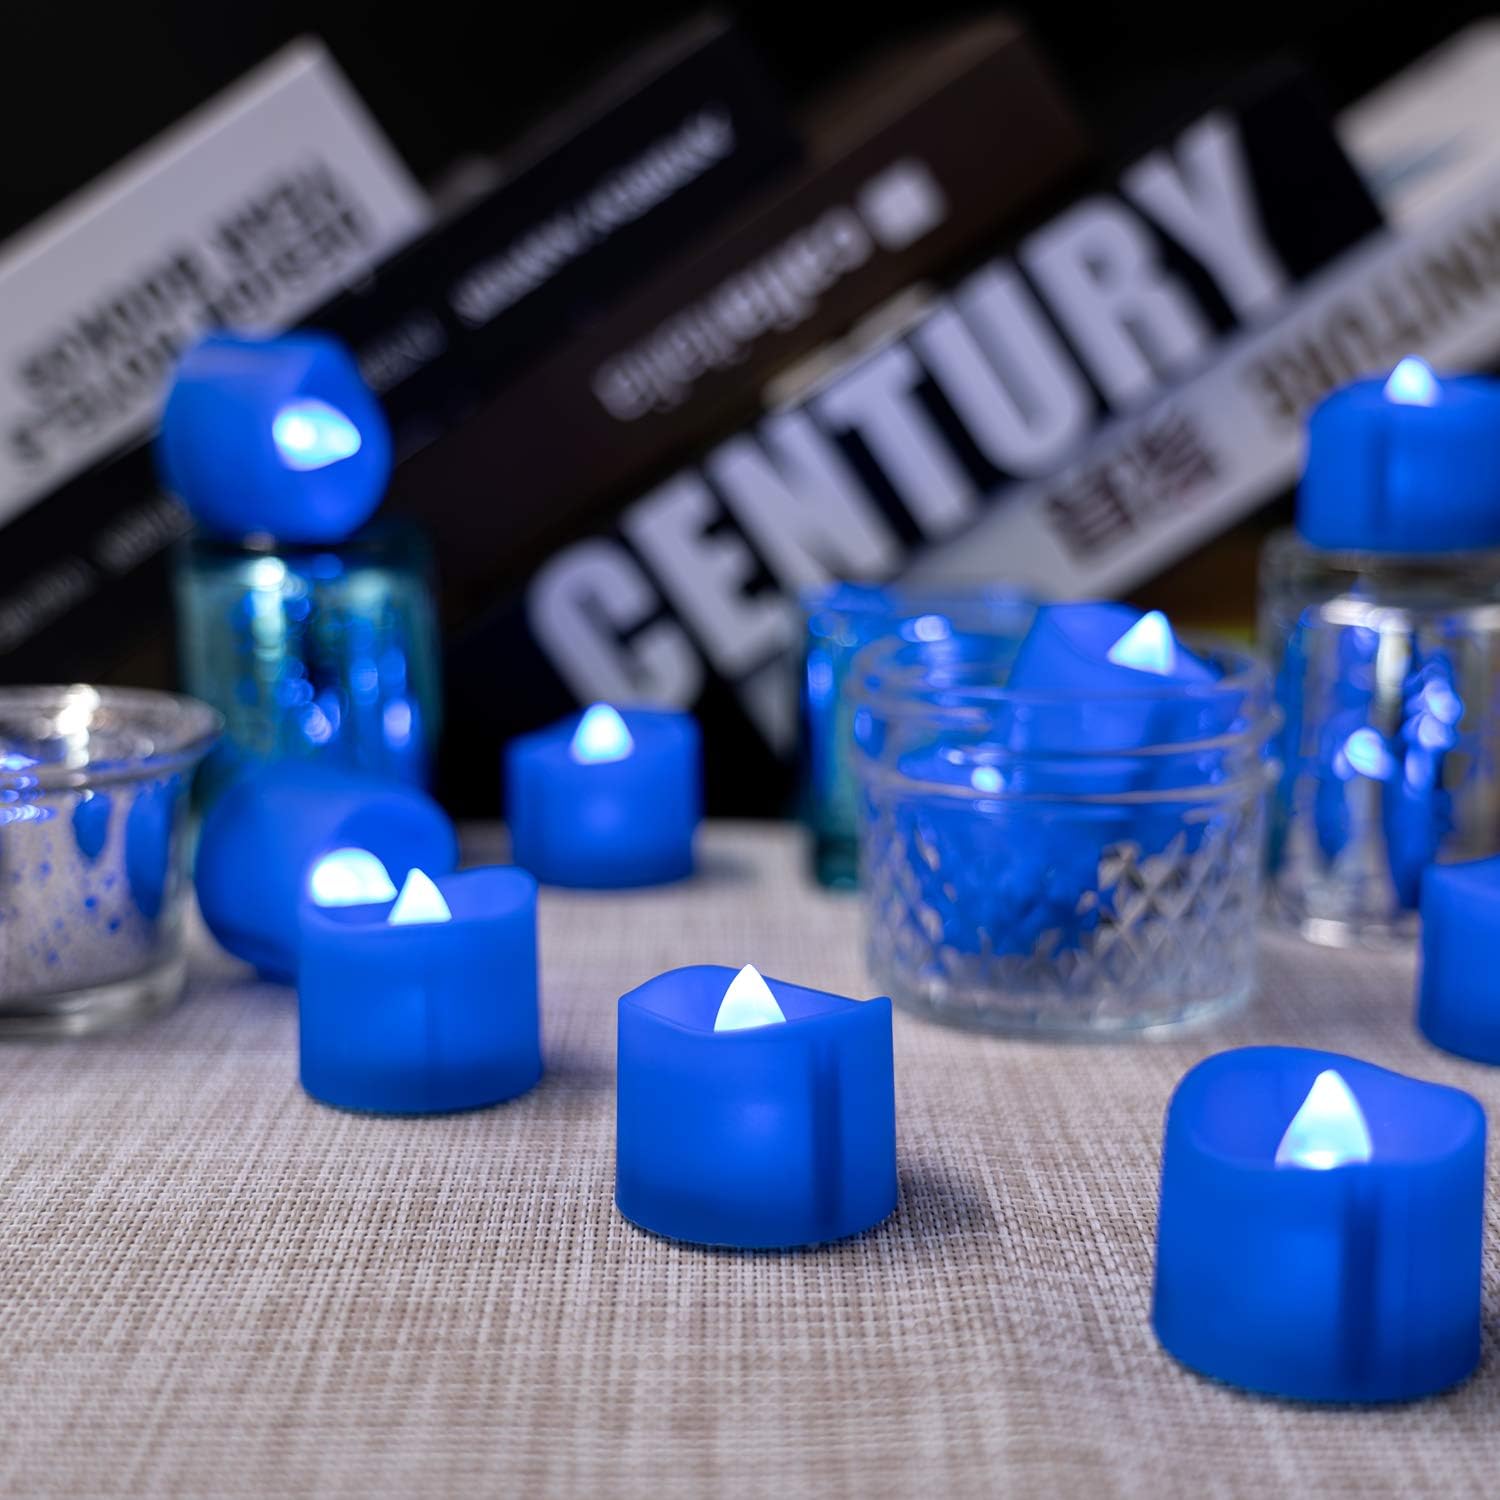 Homemory Blue Tea Lights Candles Battery Operated, Flameless Votive Candles, Flickering LED Candles, 200+Hours Colored Tealight Candles for Holiday Decor, Theme Party, Table Decor, Pack of 12